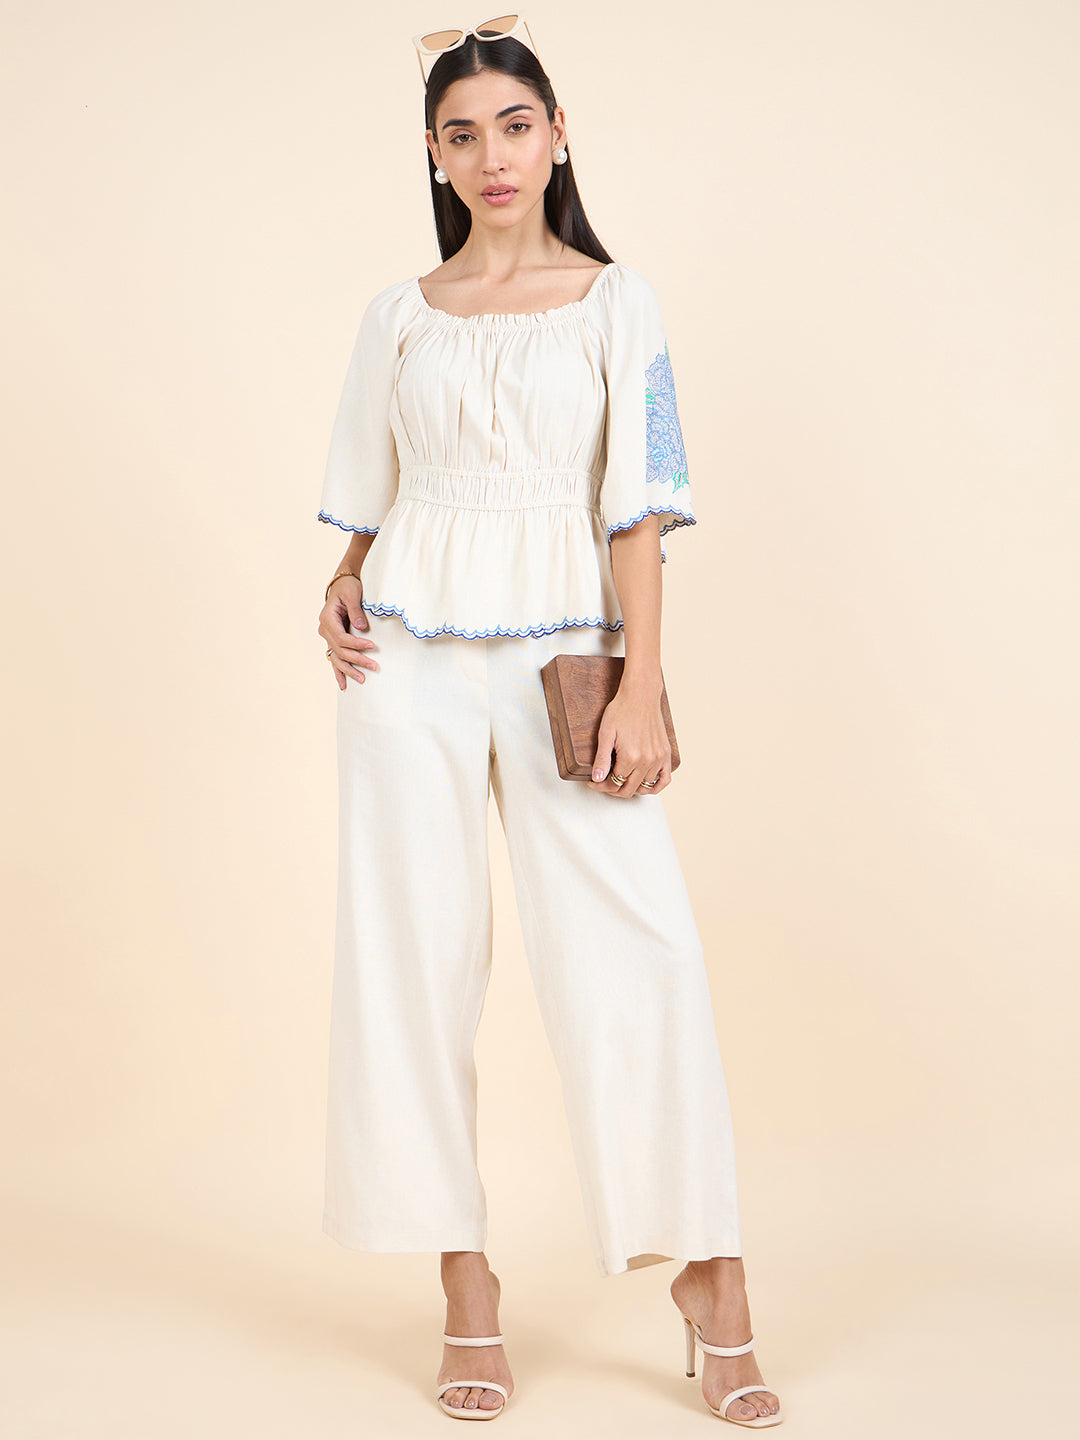 Gipsy Stylish Women Co-ord set Natural Collection.